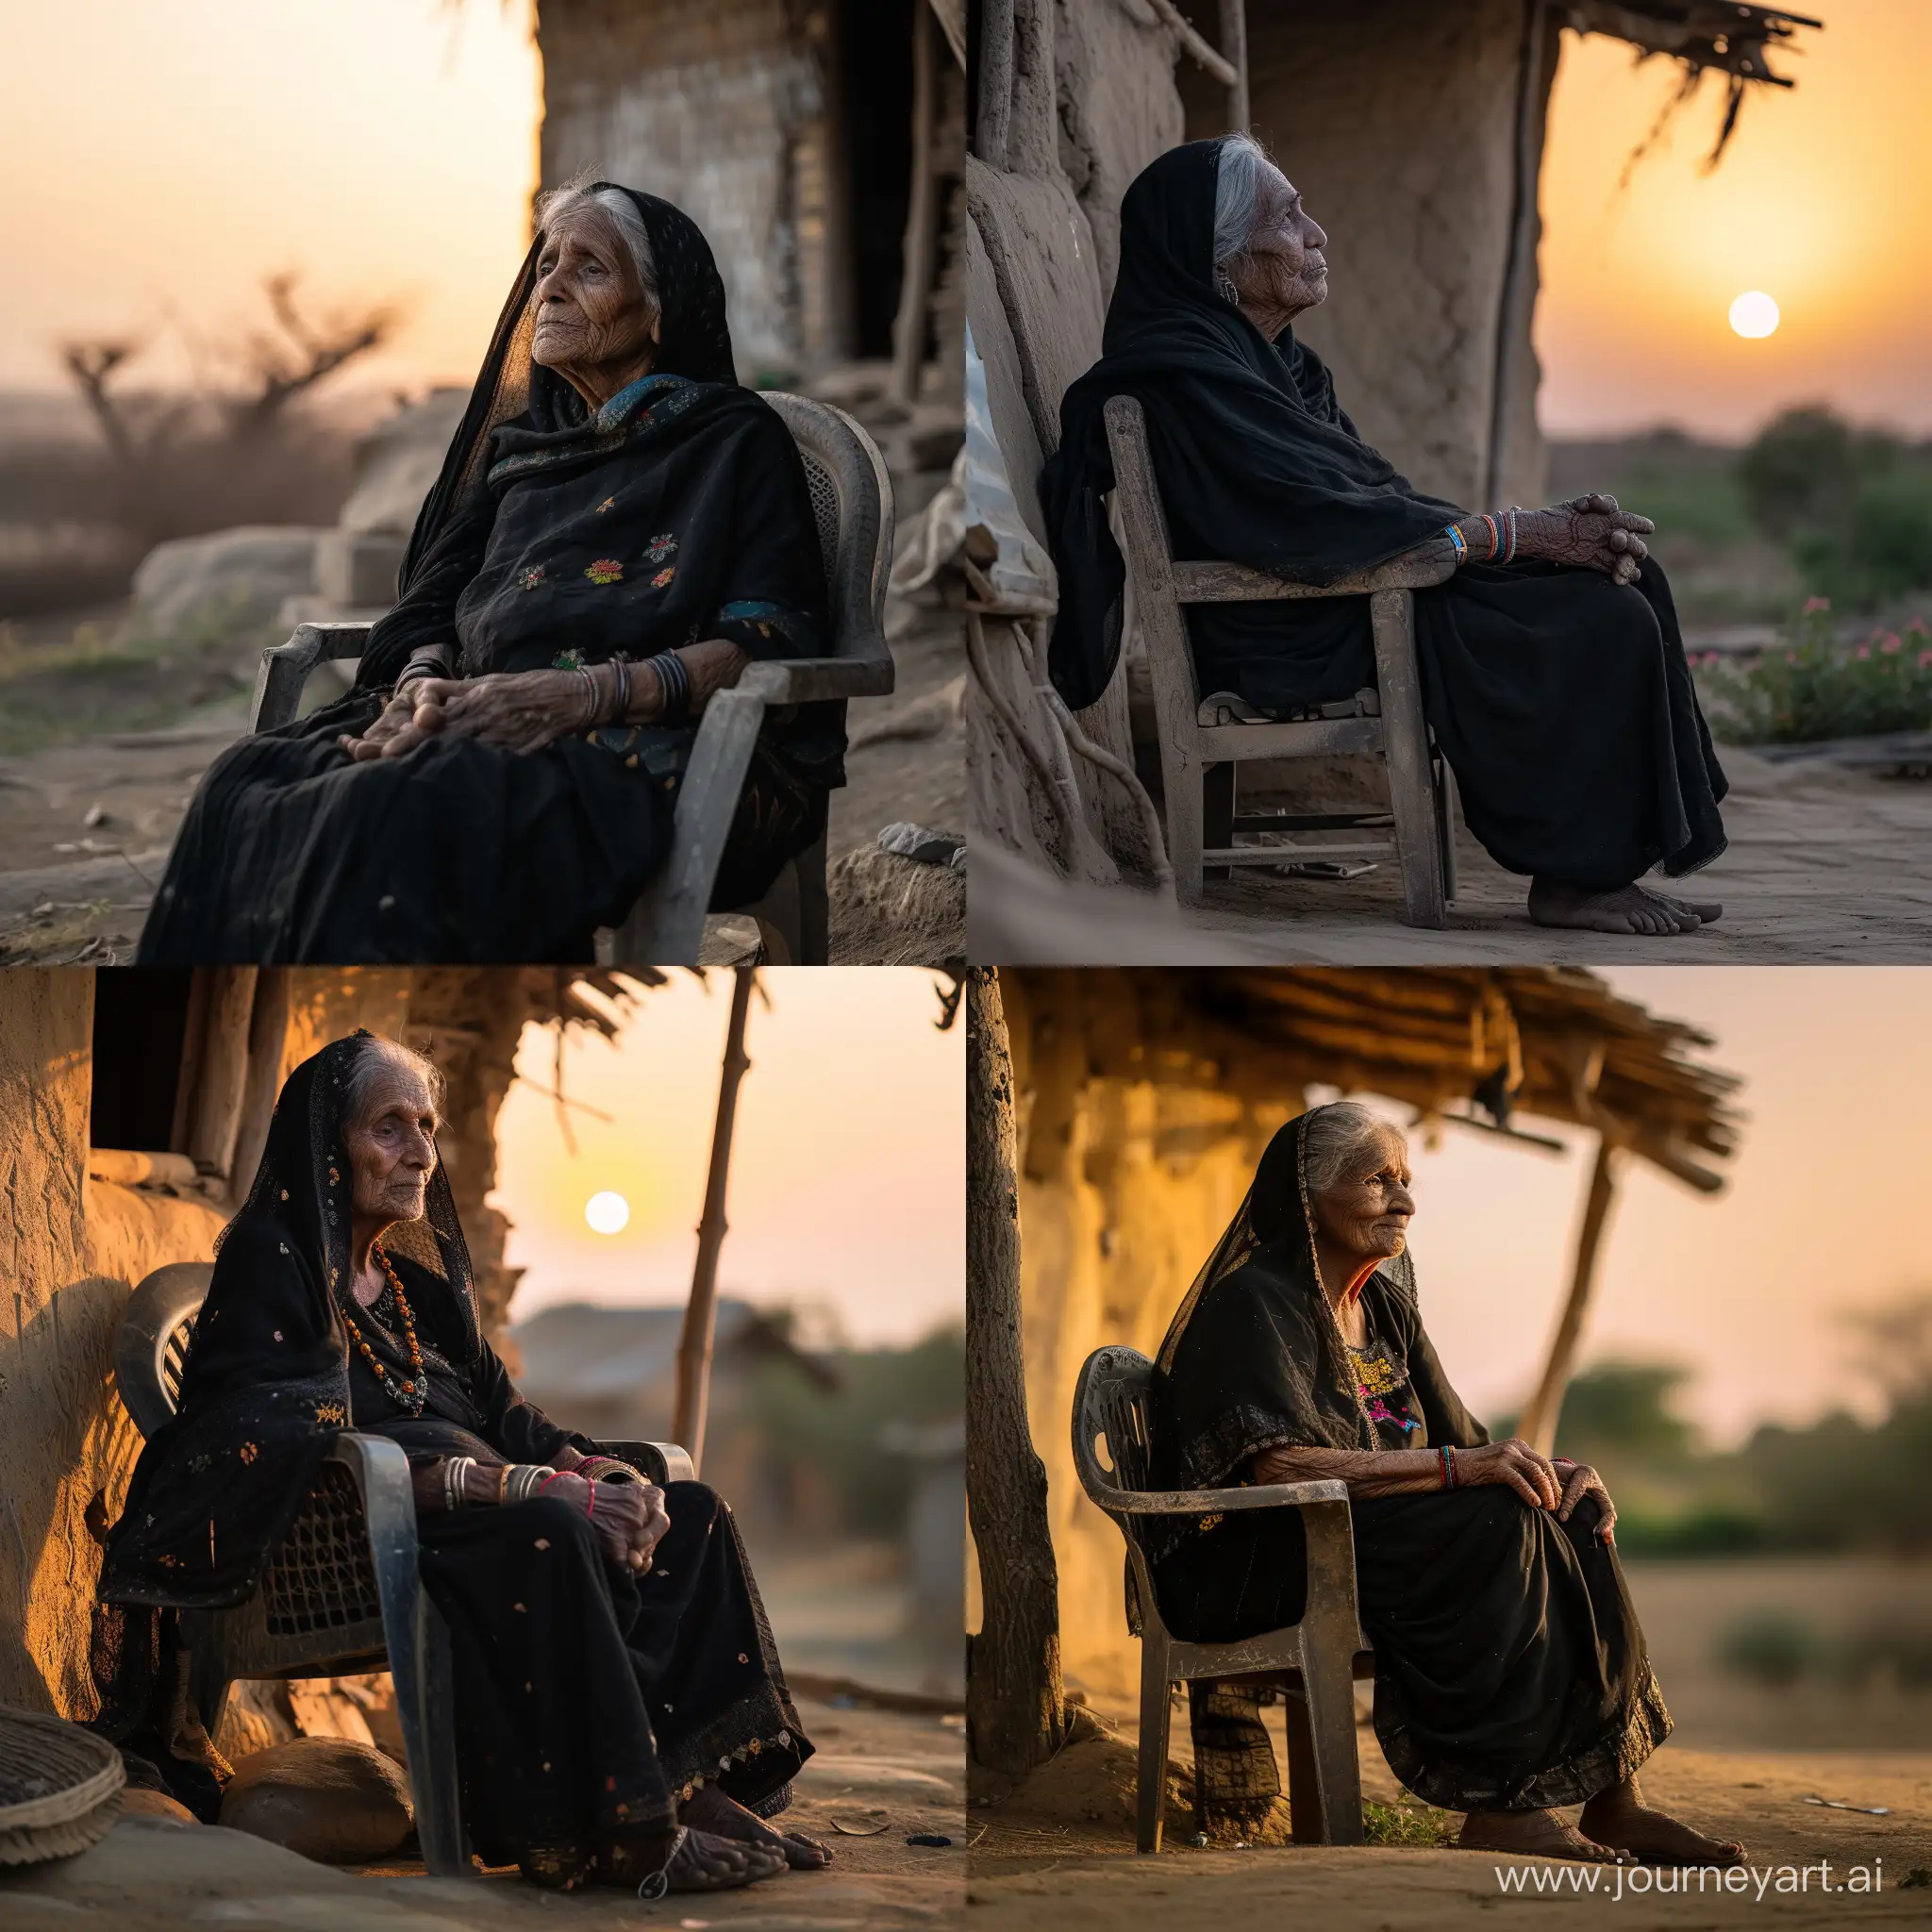  80 years old   rabari women gujarat black clothing  is sitting  on old chair near  hut  by sunset soft light and contrast  total body low angle fuji 35mm 